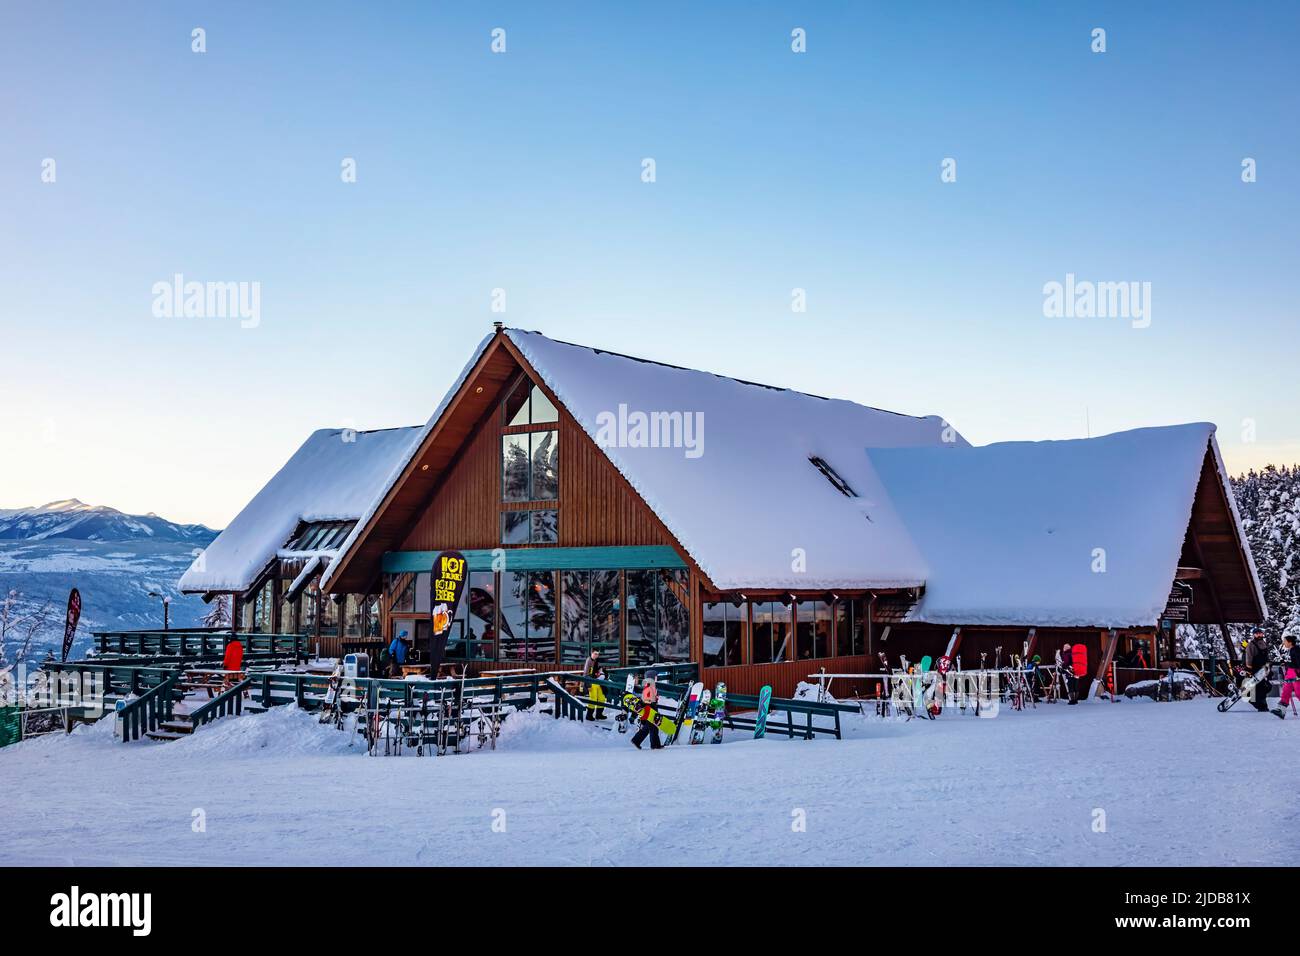 Fairmont Ski Resort chalet during the winter: Fairmont Hot Springs, BC, Canada Stock Photo